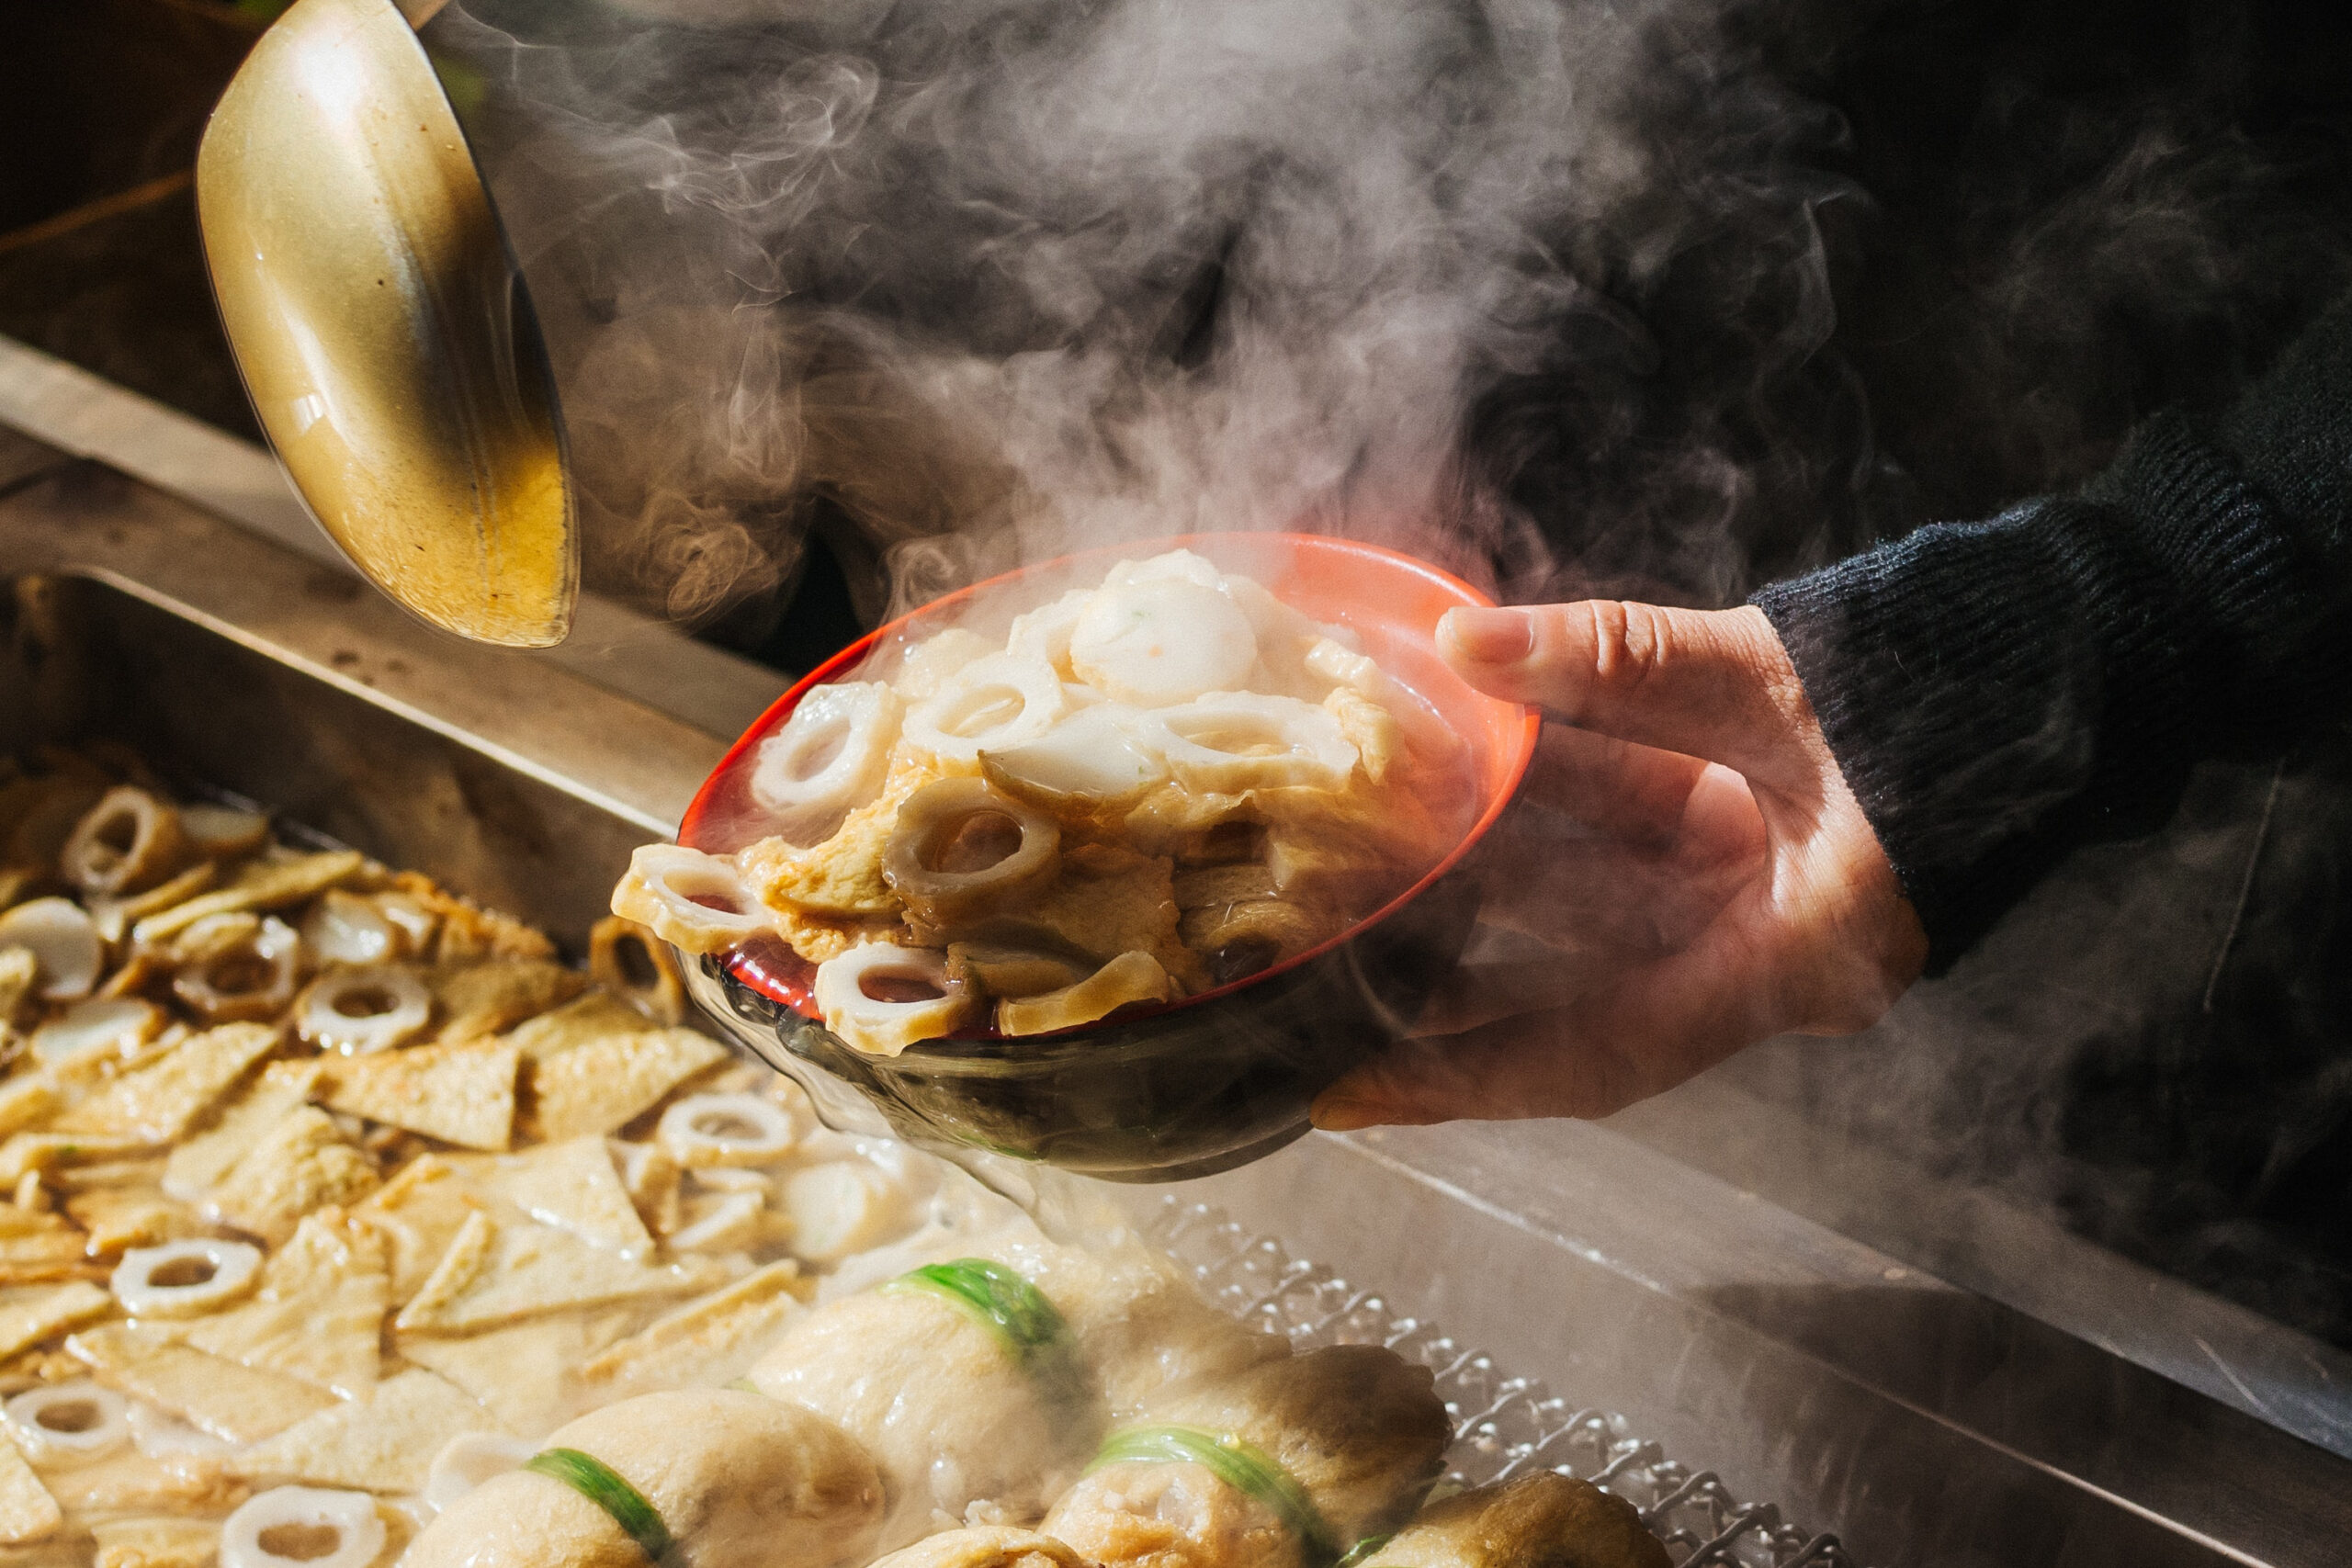 Hand holding a steaming bowl of traditional Korean udon, highlighting the warm, street food culture in Korea.